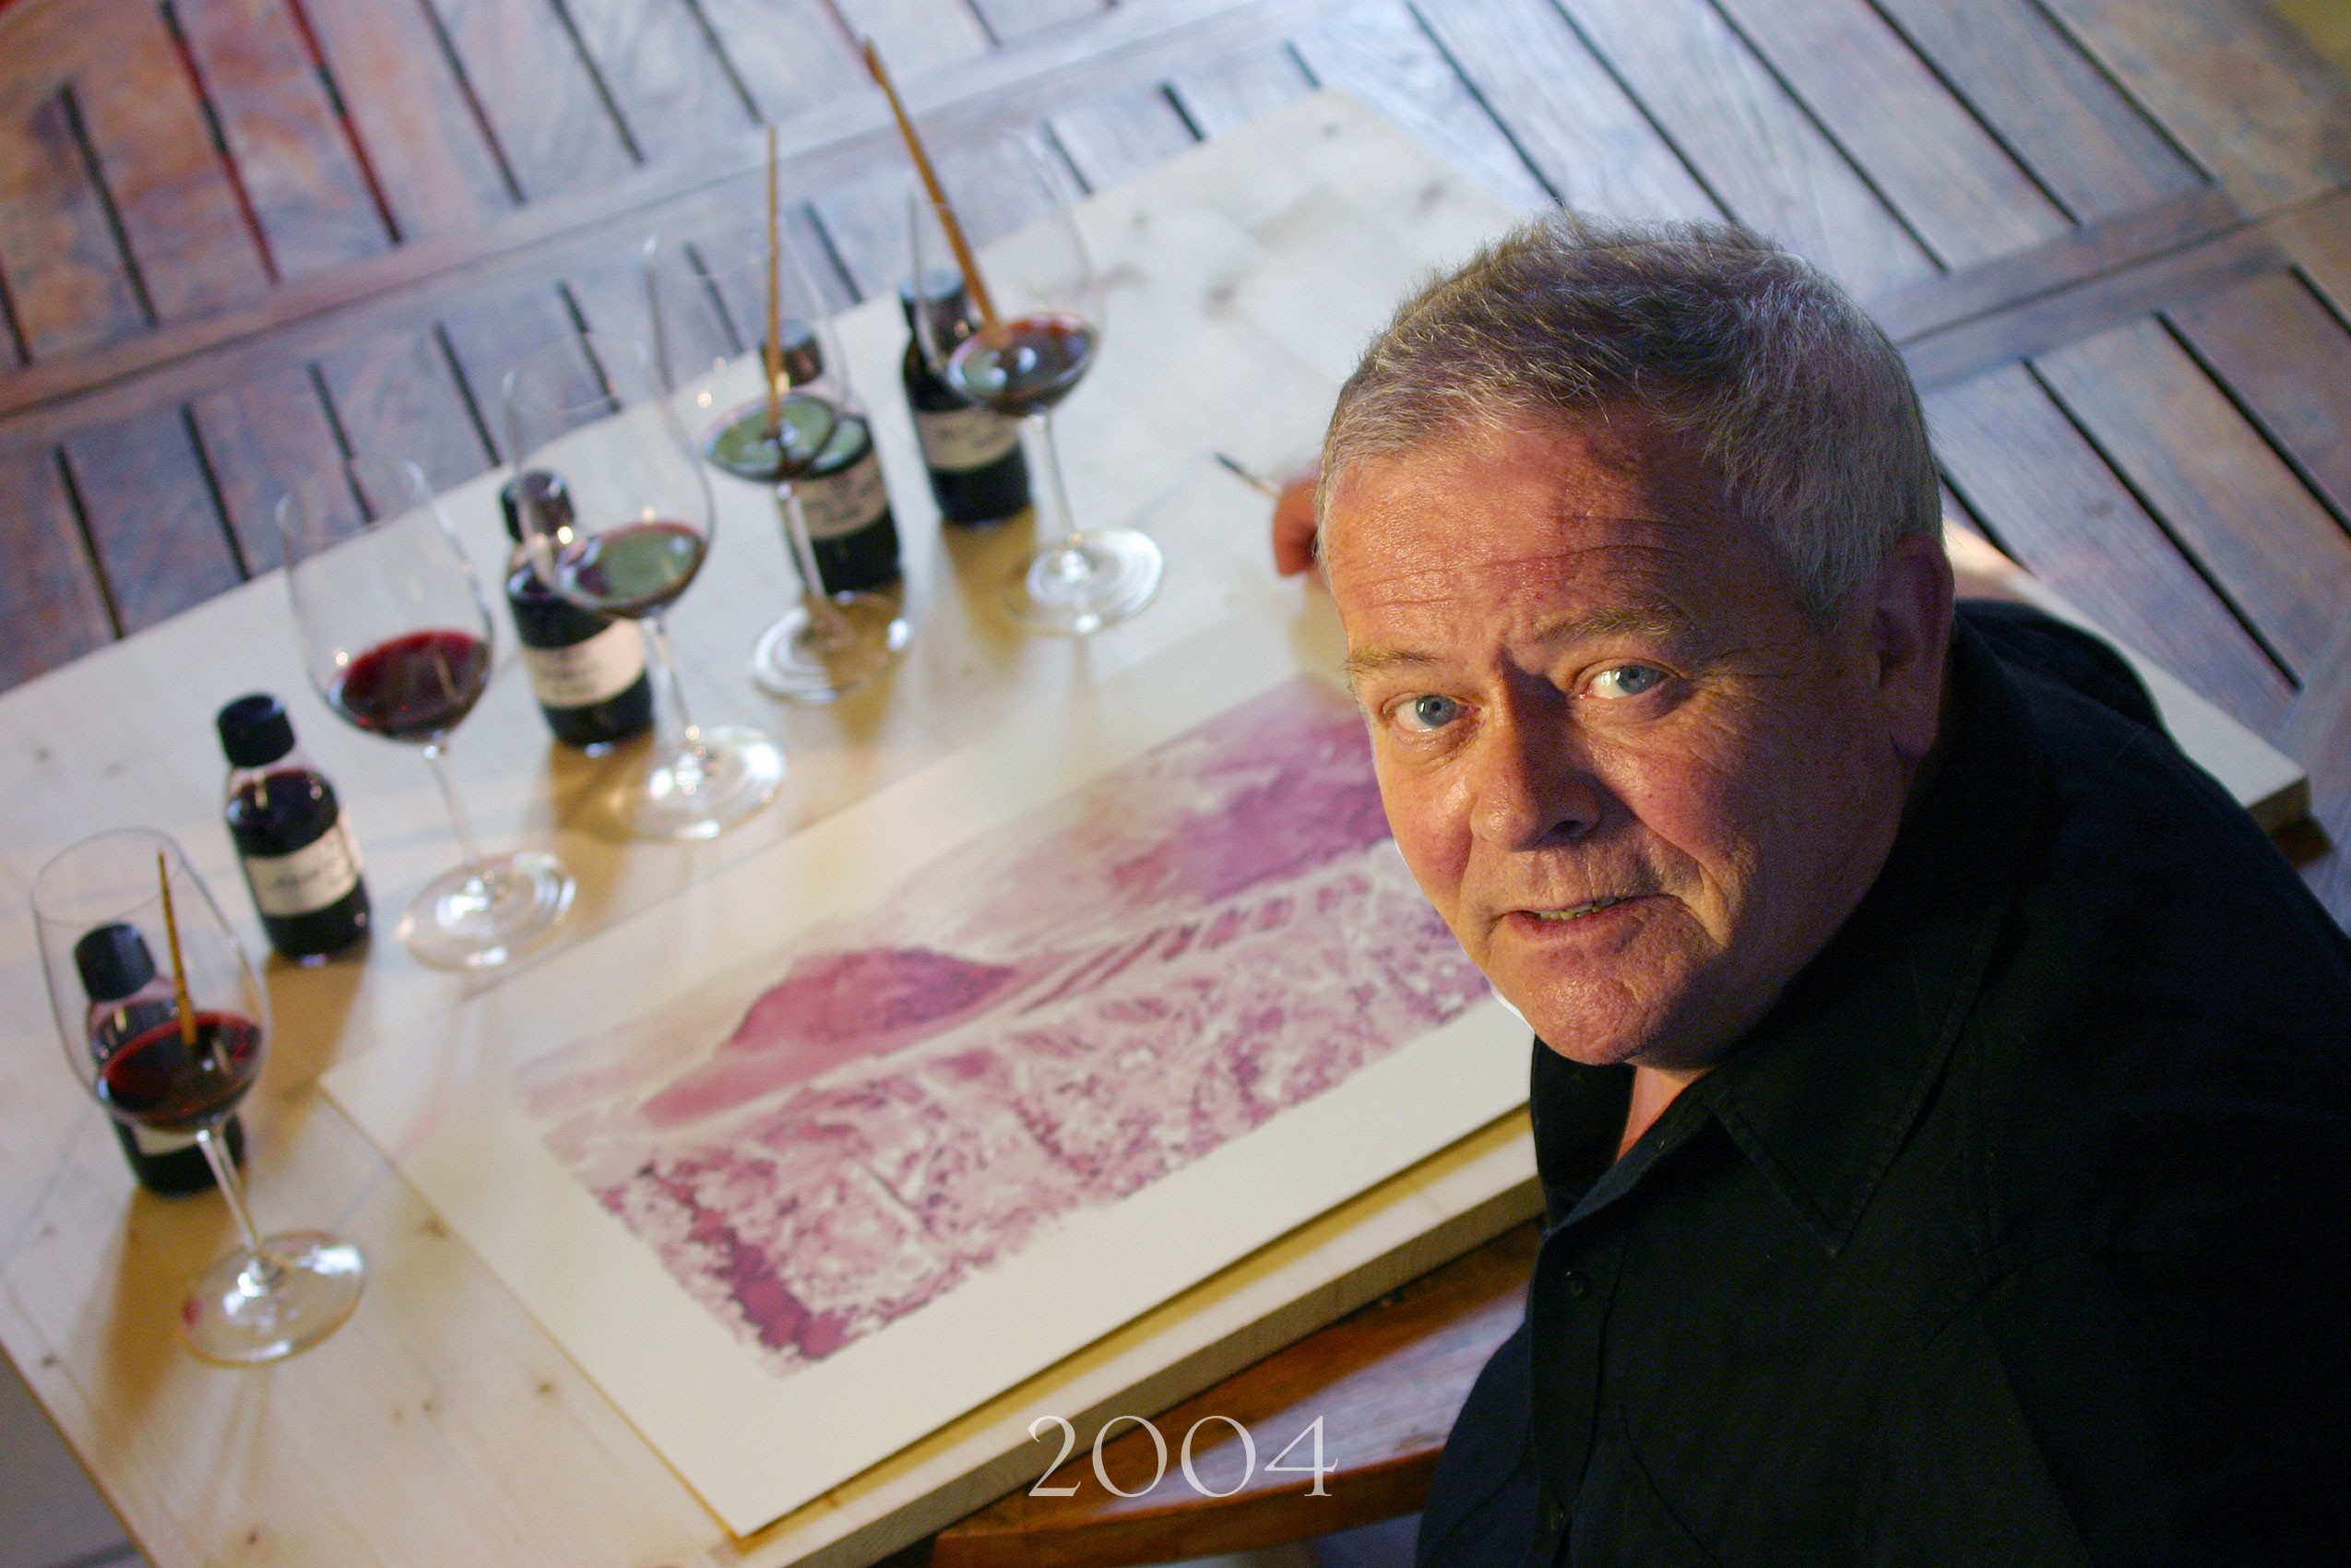 Phillippe Dufrenoy painting with Cain wine in 2004